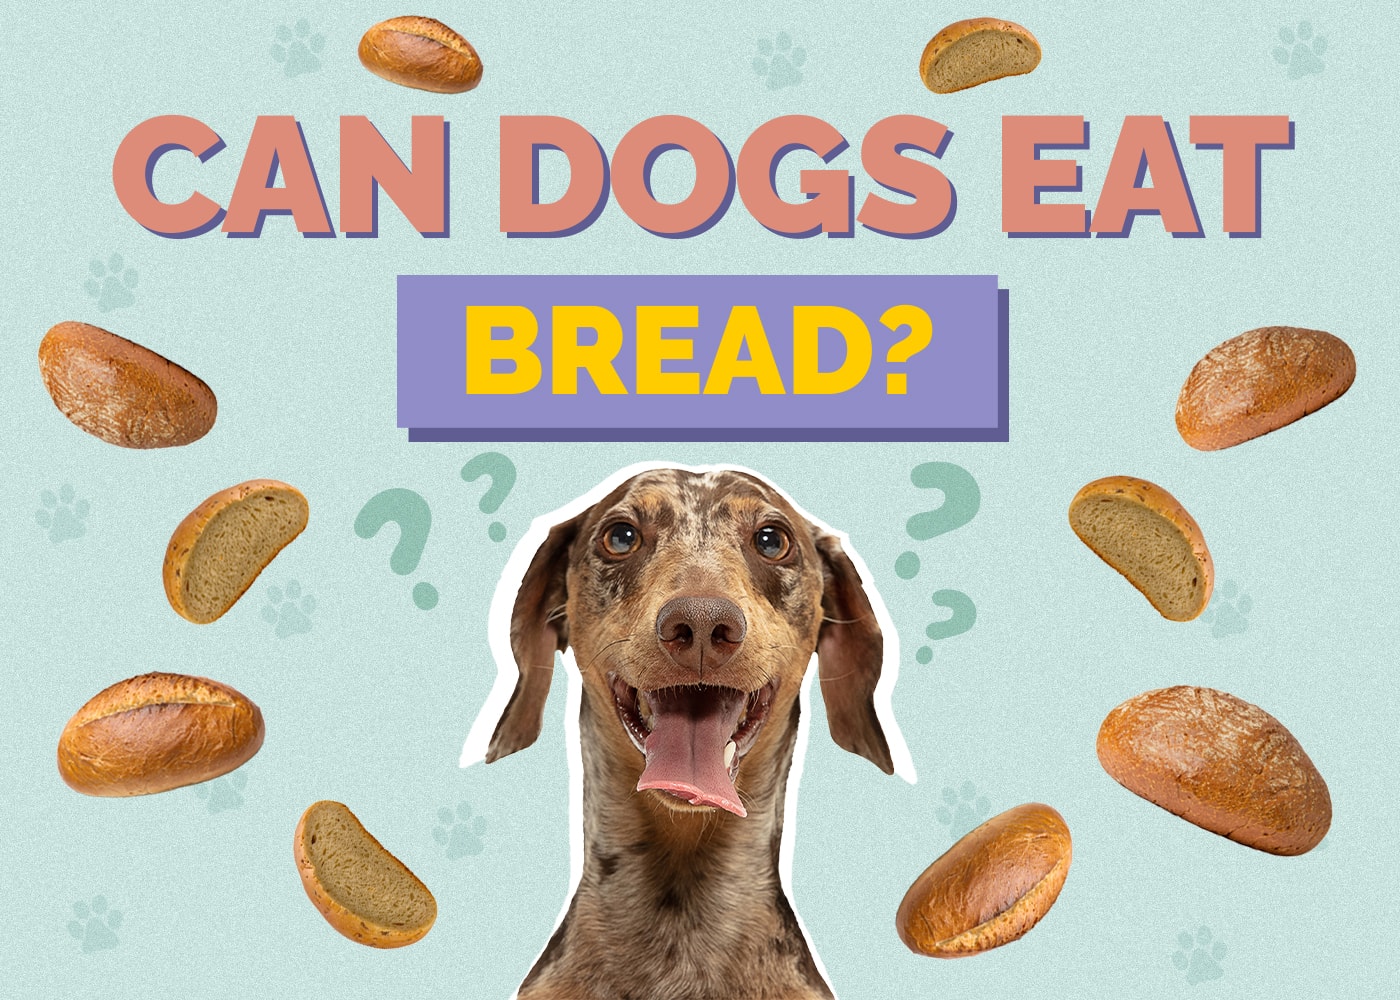 Can Dog Eat bread